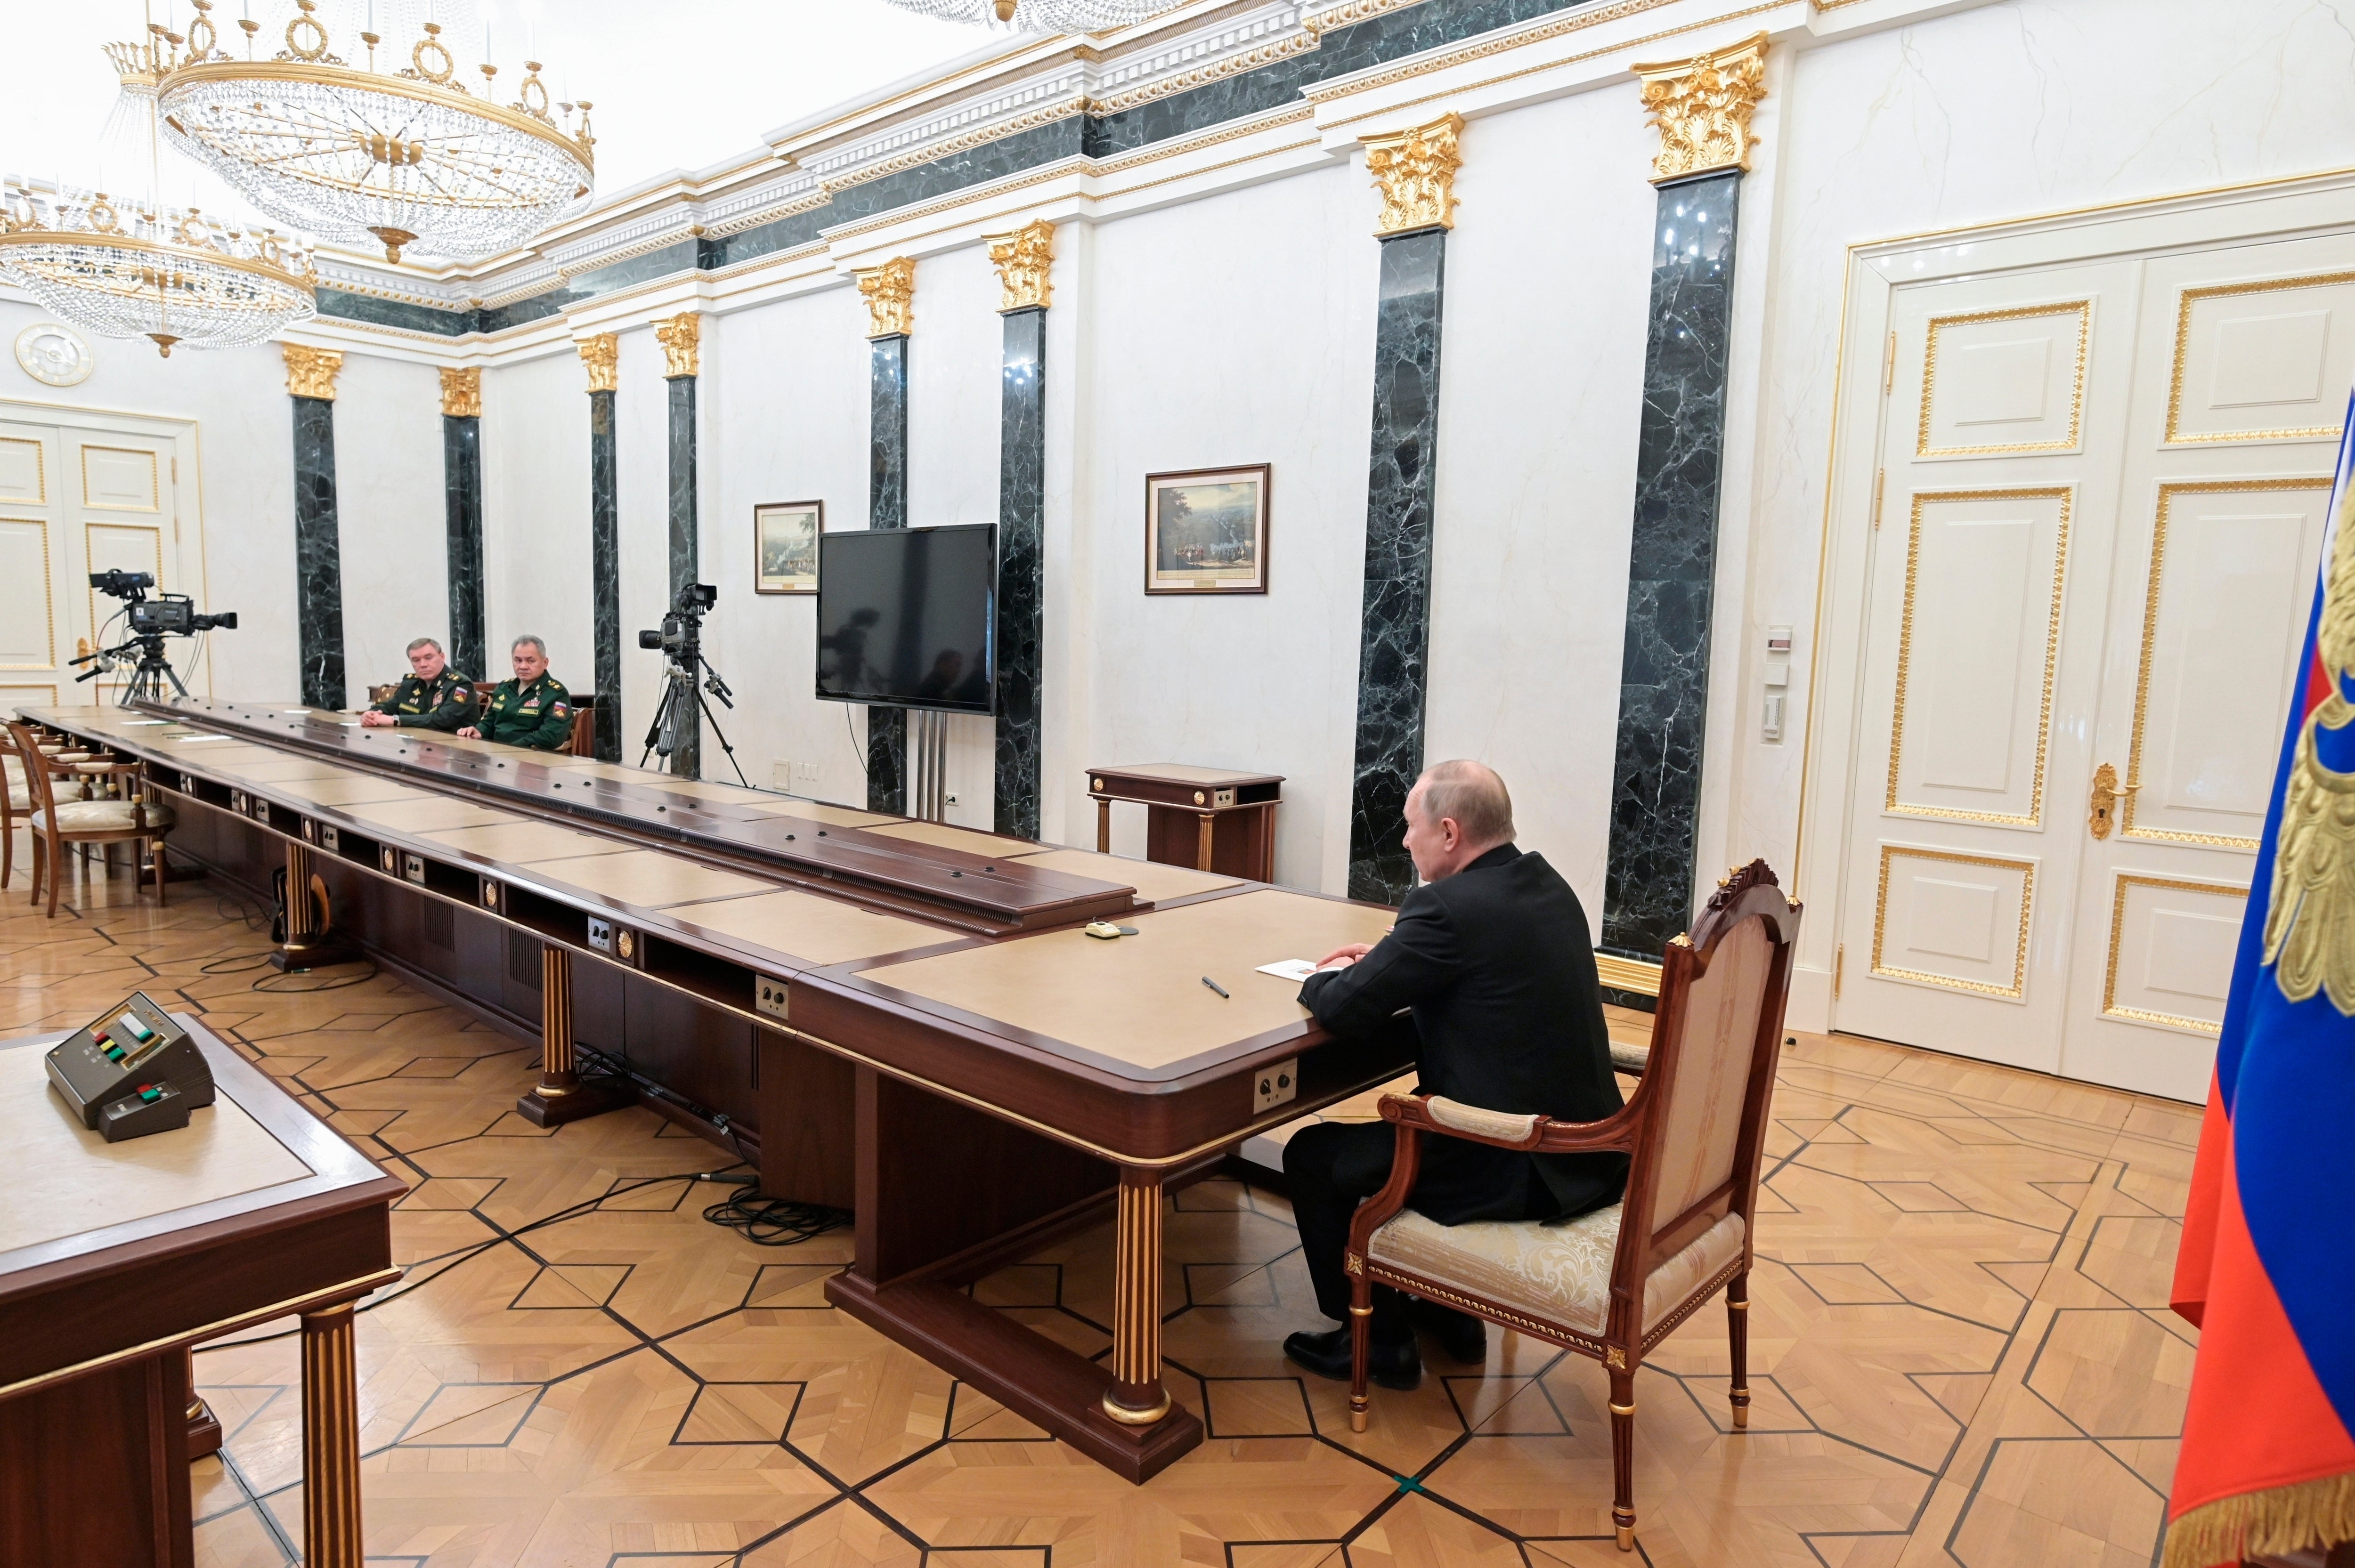 Russian President Vladimir Putin, right, speaks to Russian Defense Minister Sergei Shoigu, second left, and Head of the General Staff of the Armed Forces of Russia and First Deputy Defense Minister Valery Gerasimov, left, during their meeting in Moscow, Russia, Sunday, Feb. 27, 2022.